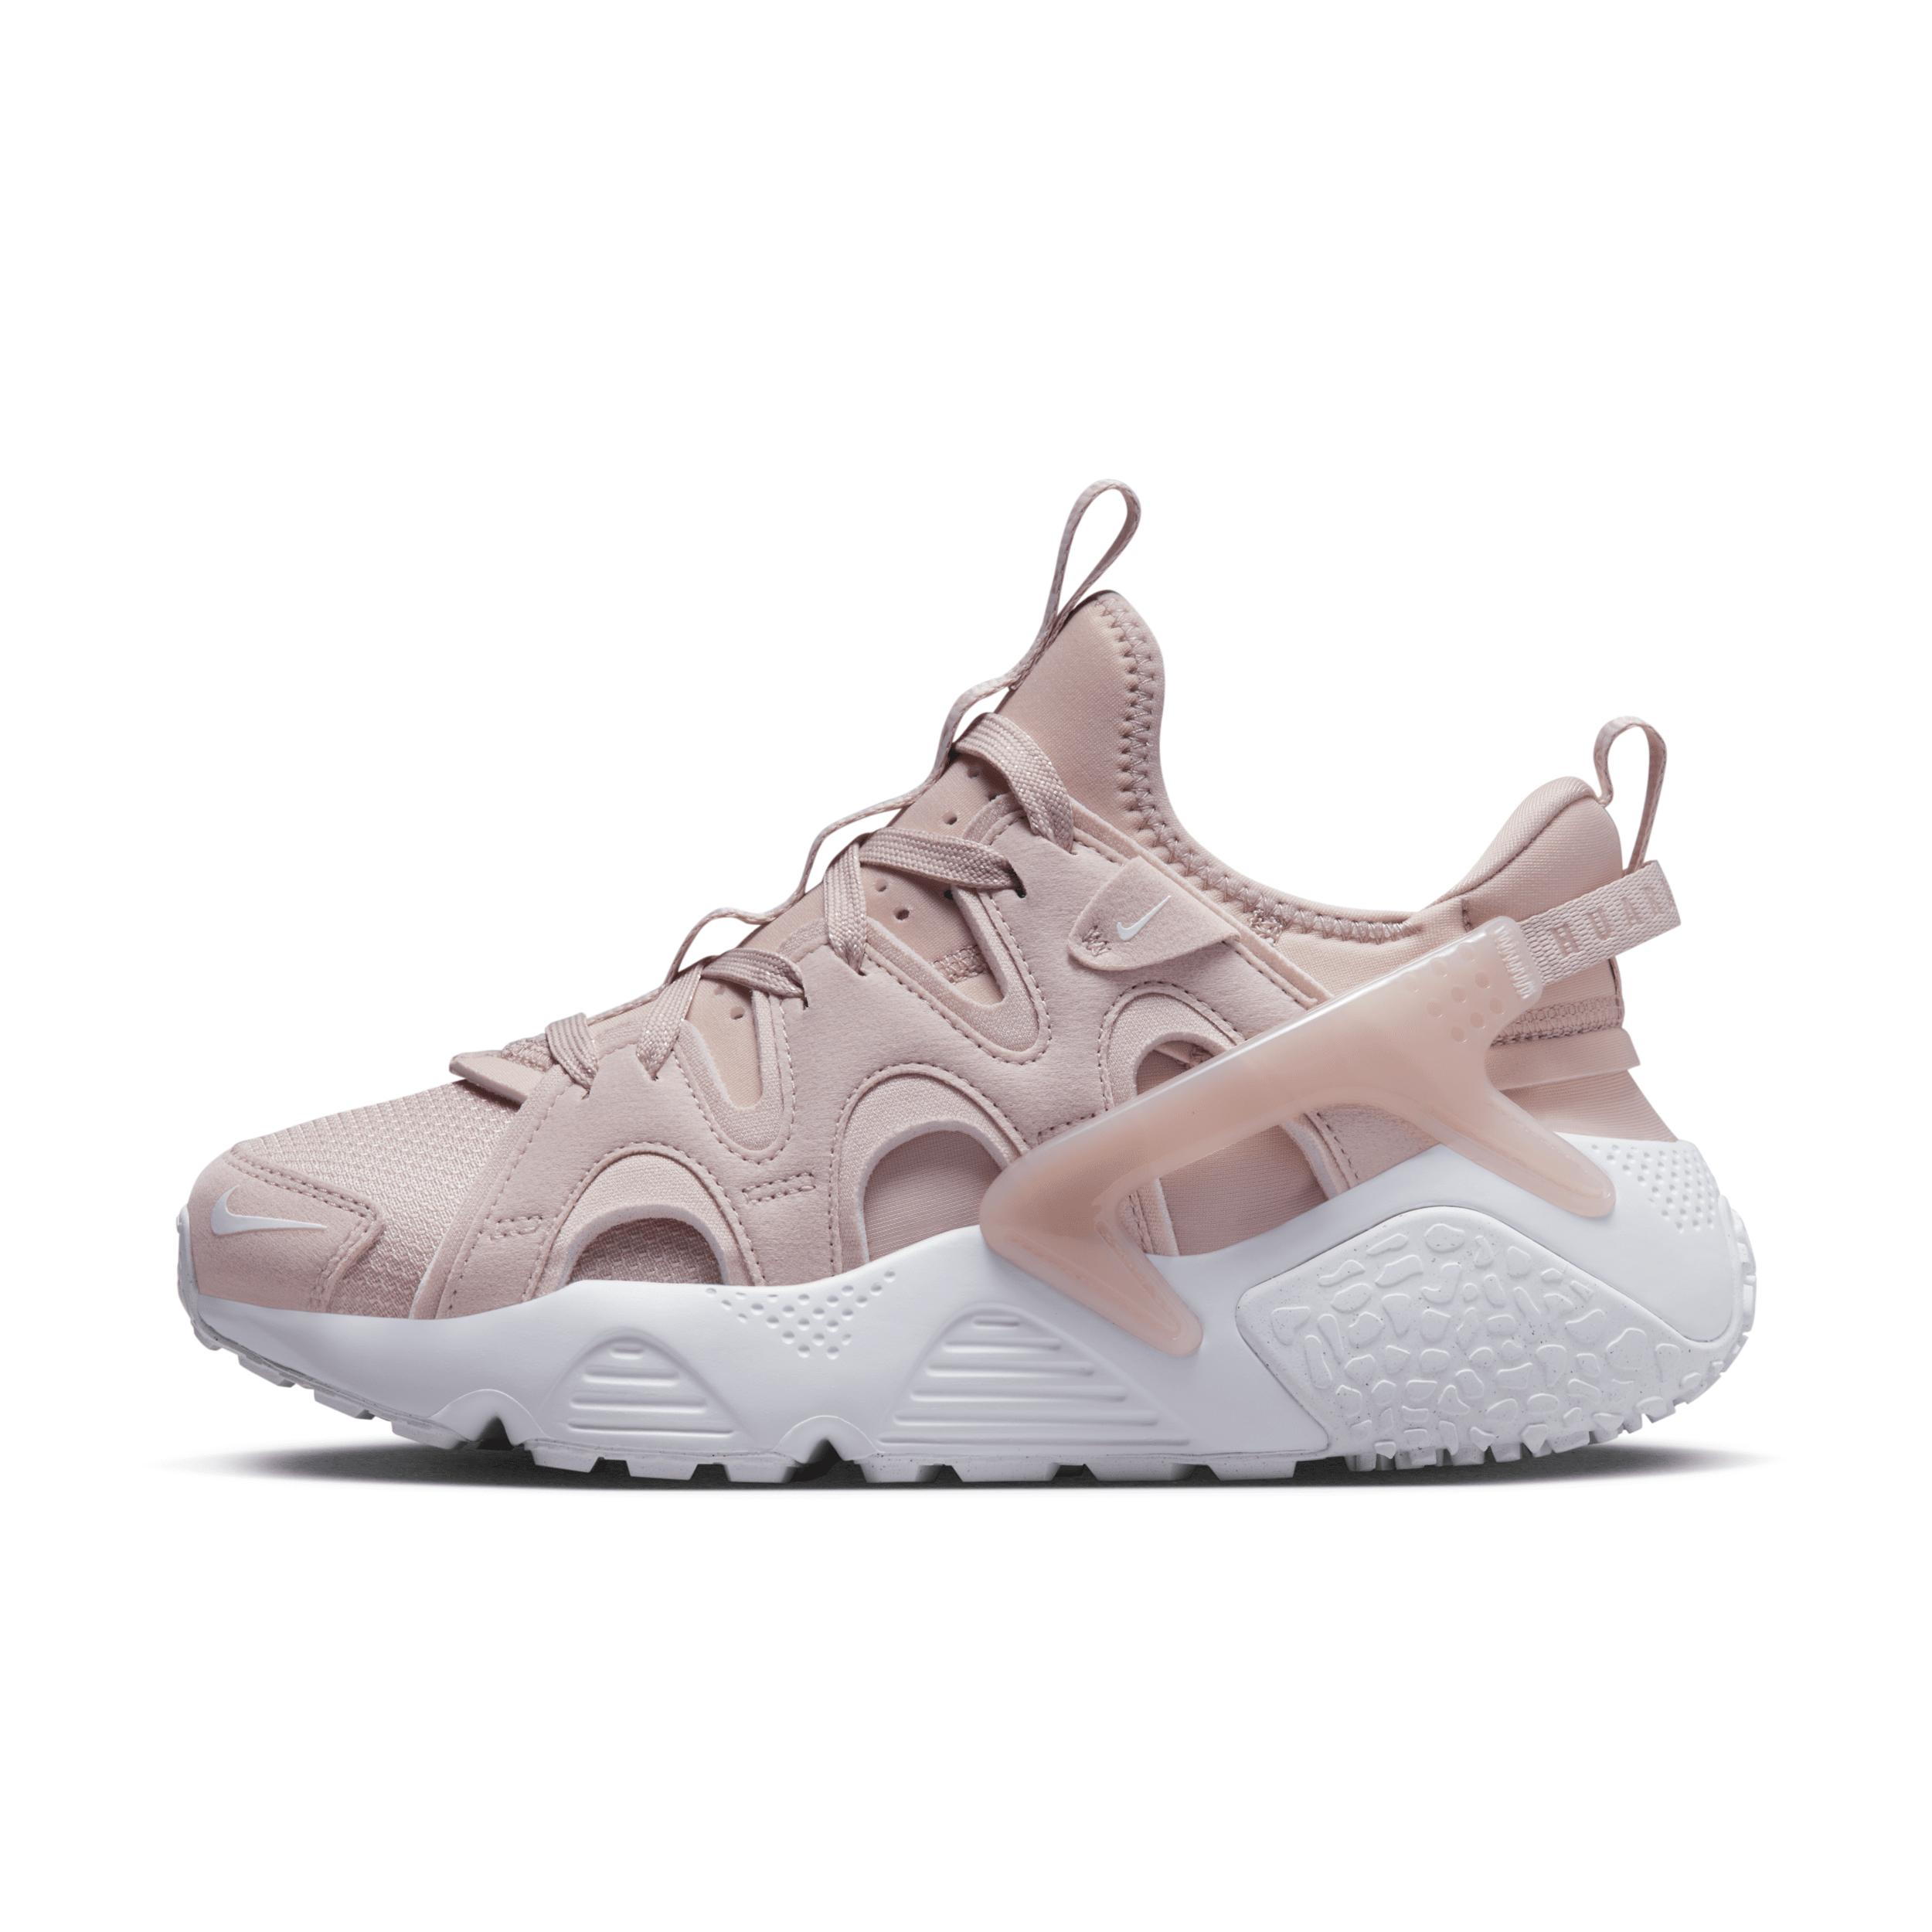 Nike Air Huarache Craft Shoes in Gray | Lyst